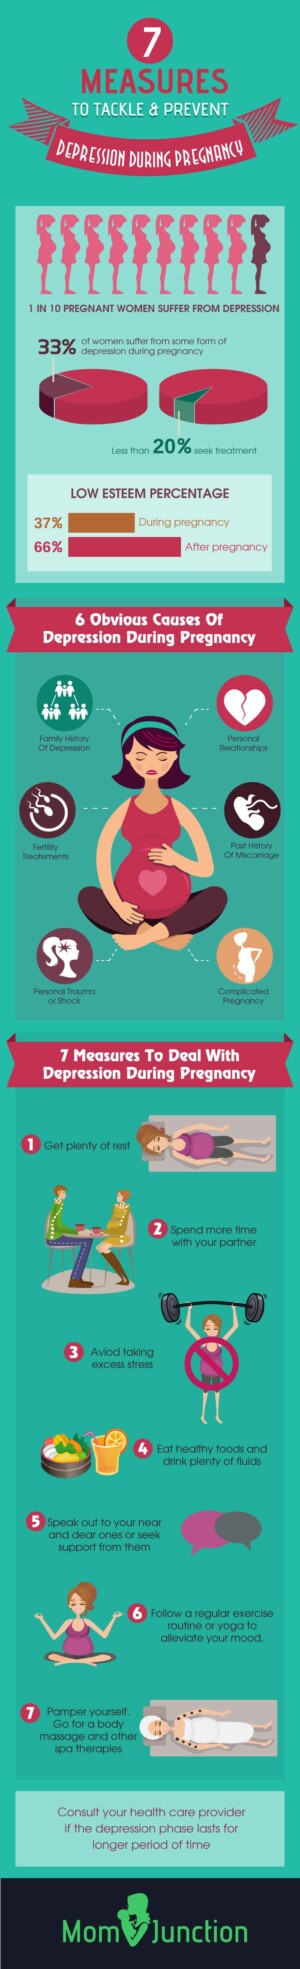 7 Measures To Deal With Depression During Pregnancy